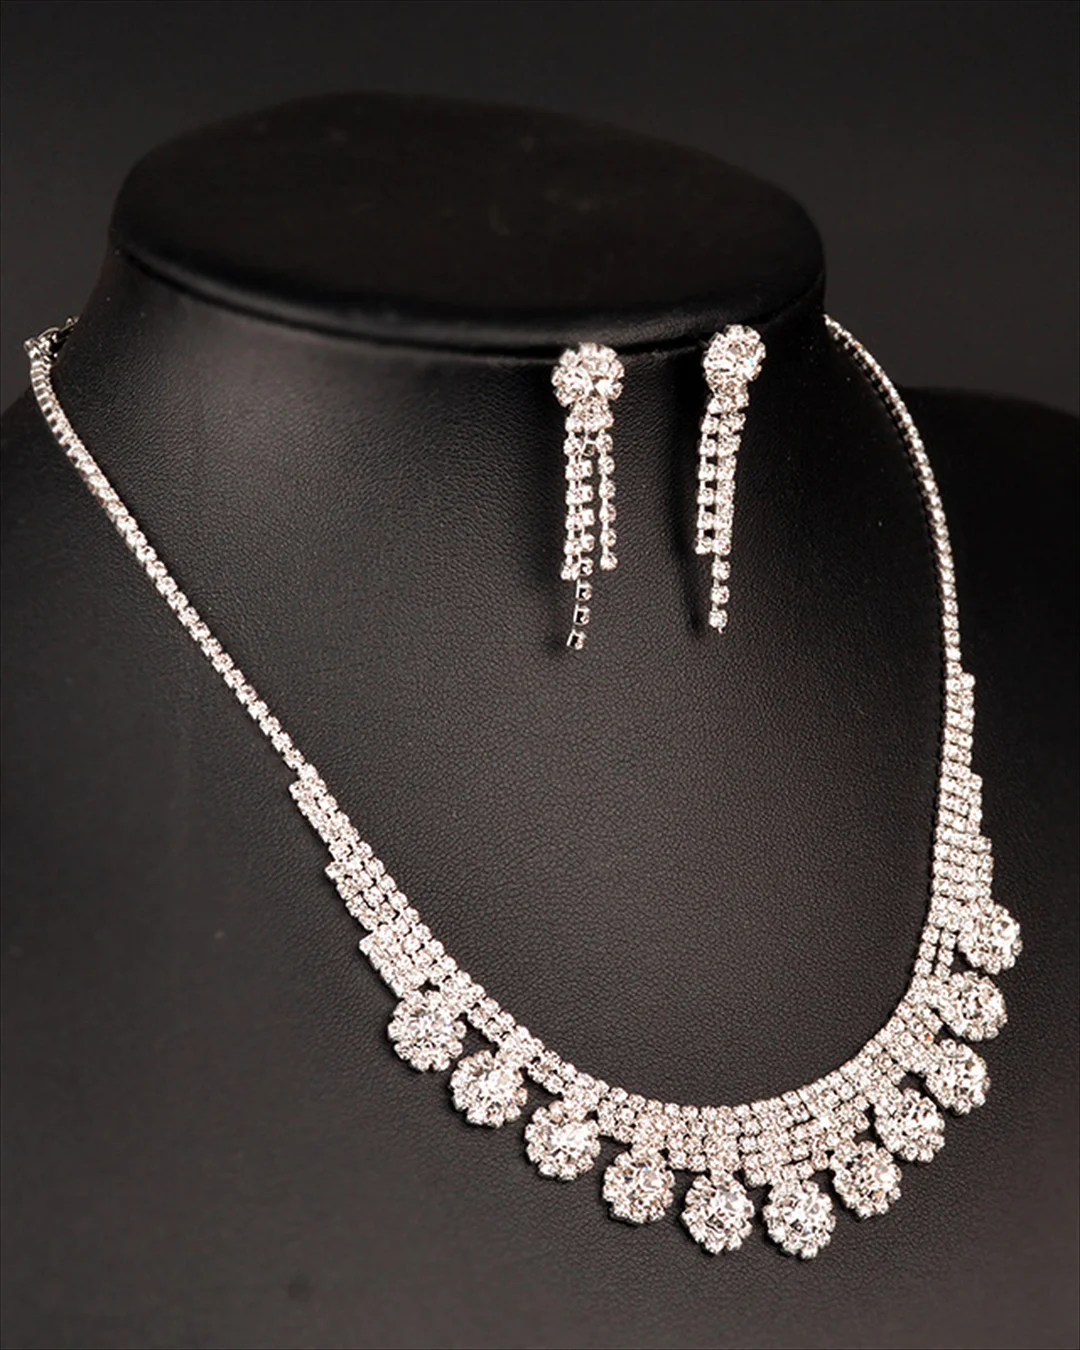 Evening Rhinestone Earrings and Necklace Set